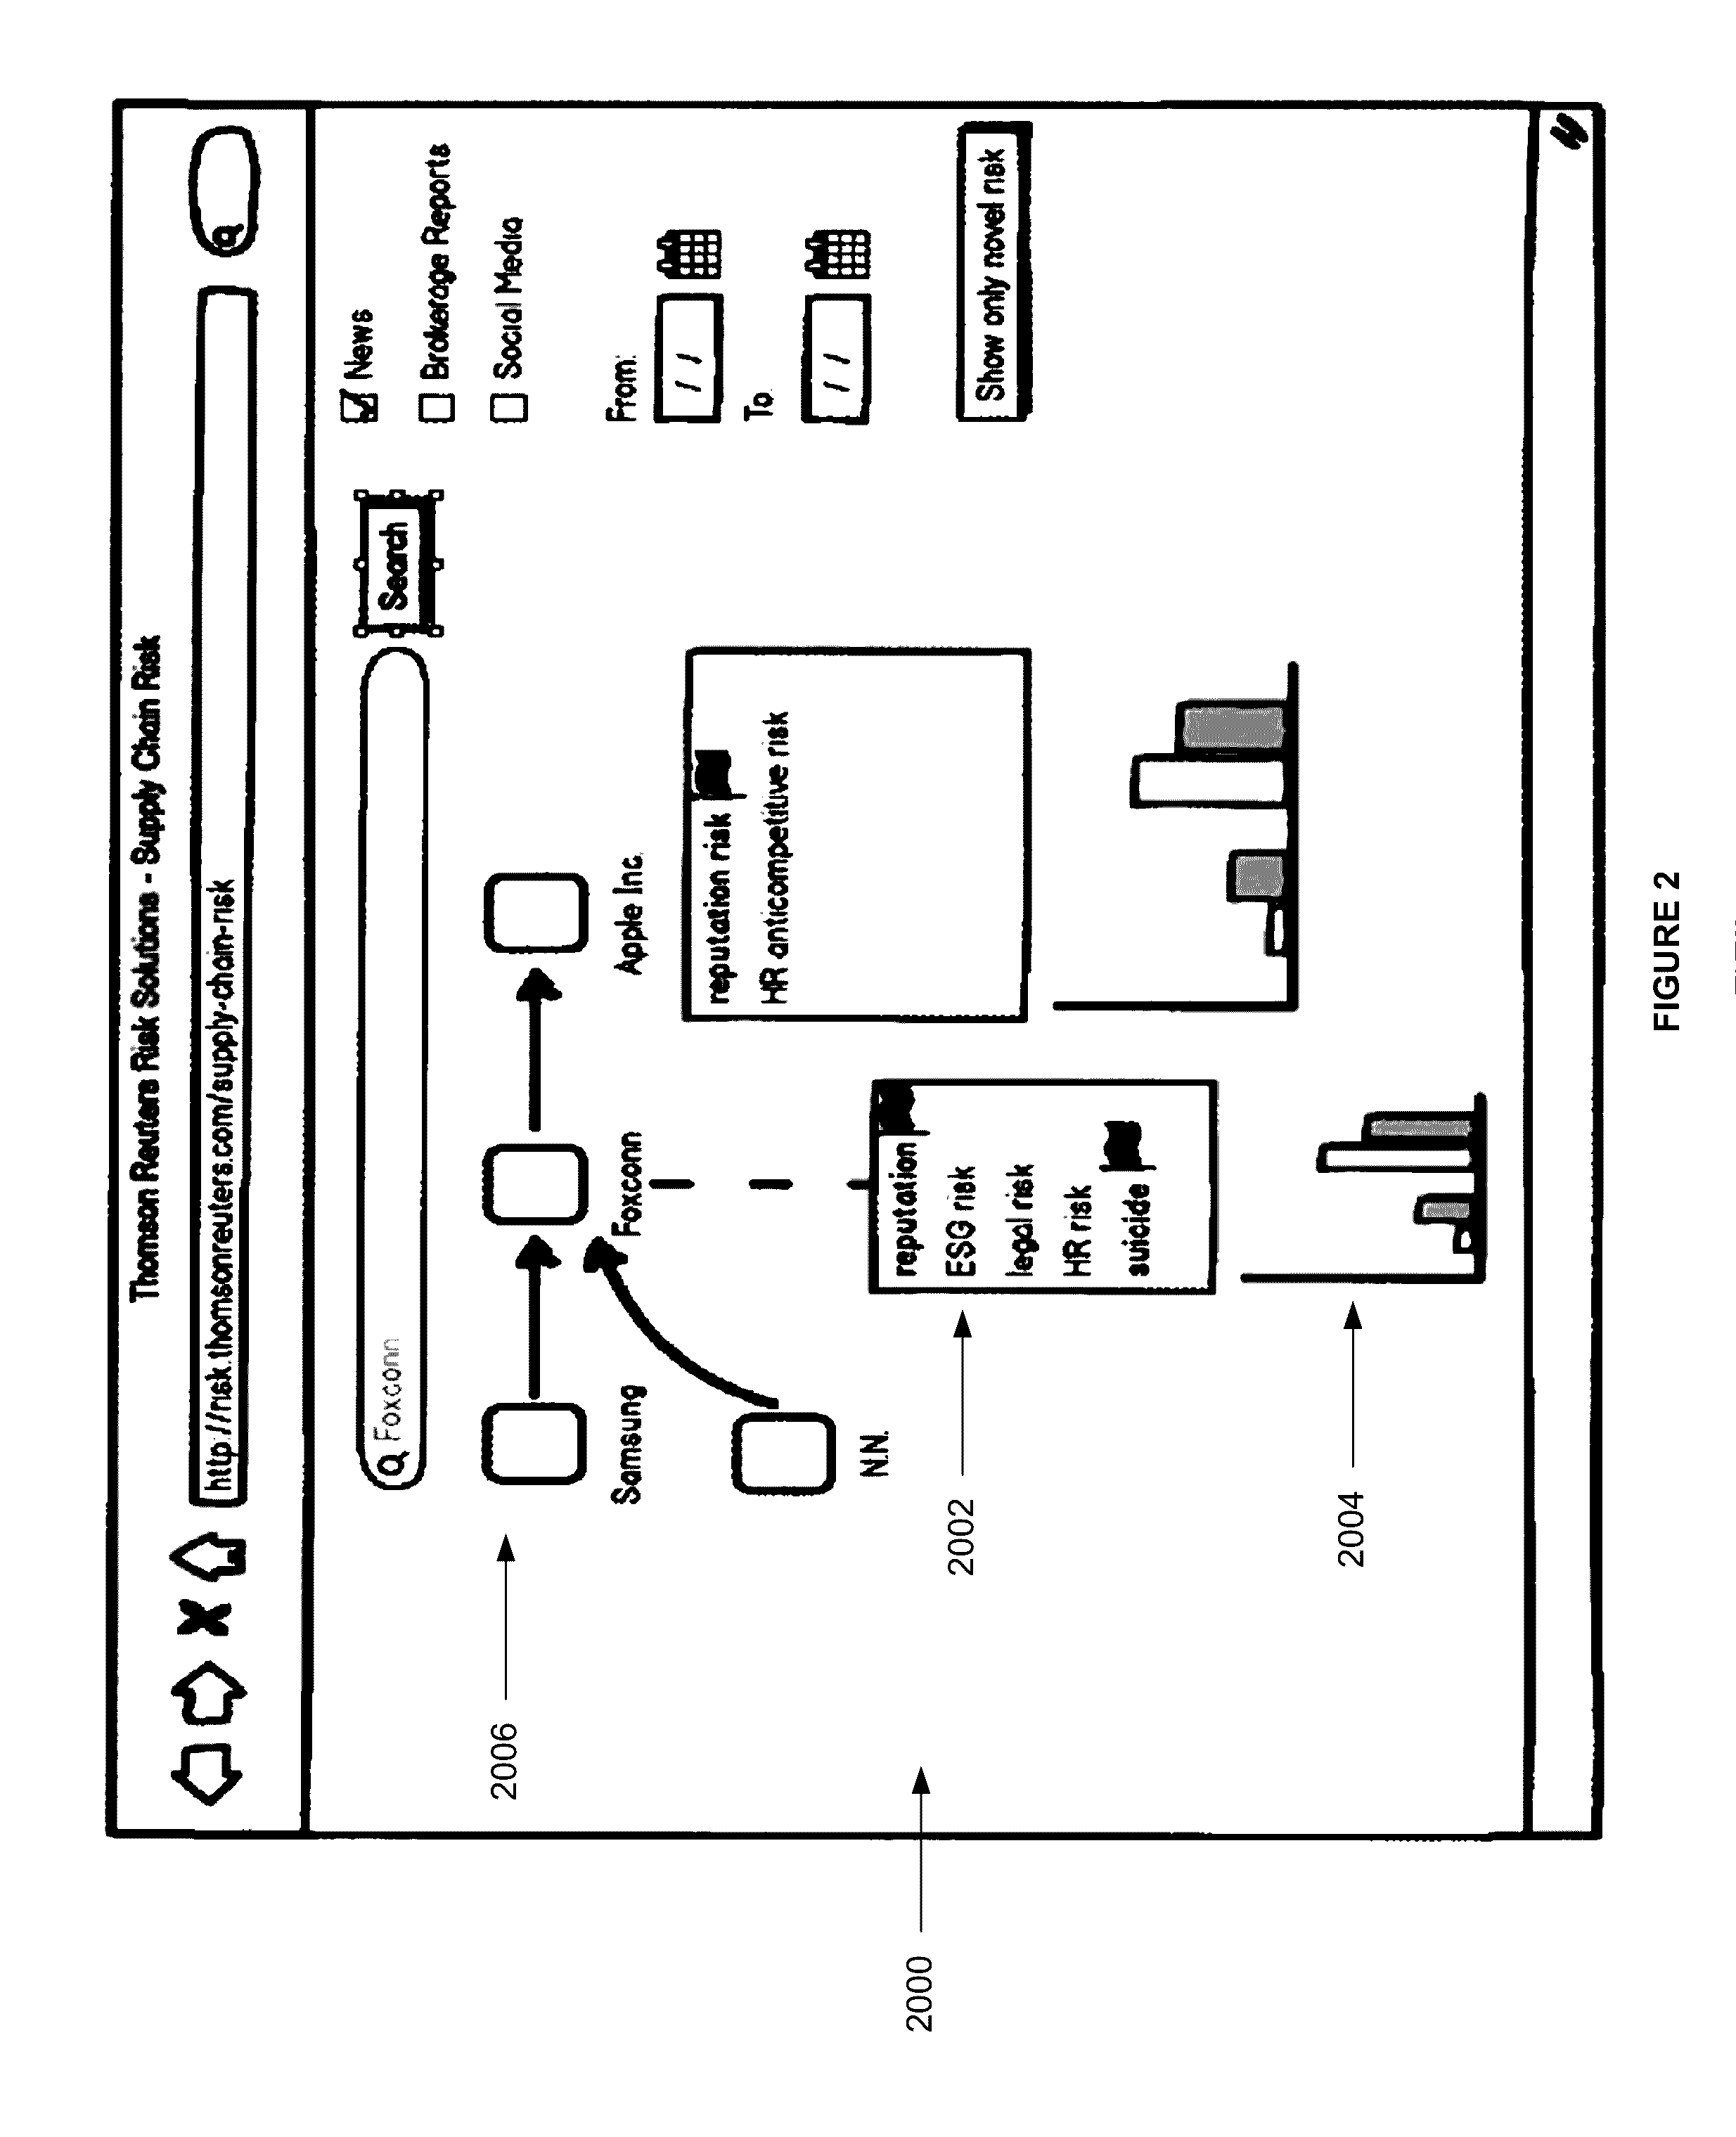 Risk identification and risk register generation system and engine